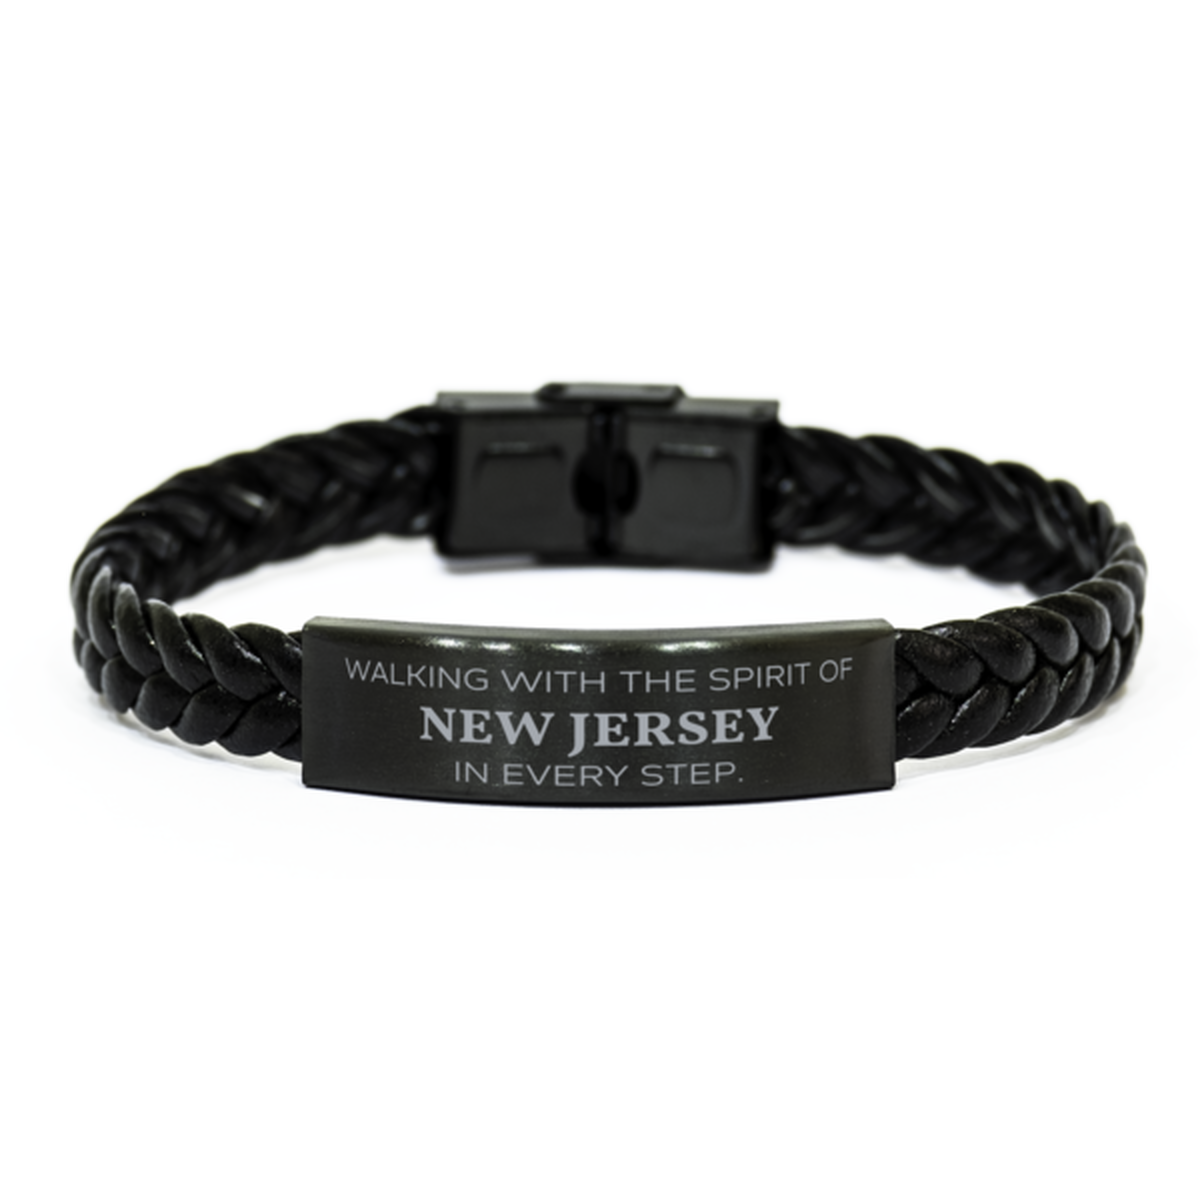 New Jersey Gifts, Walking with the spirit, Love New Jersey Birthday Christmas Braided Leather Bracelet For New Jersey People, Men, Women, Friends